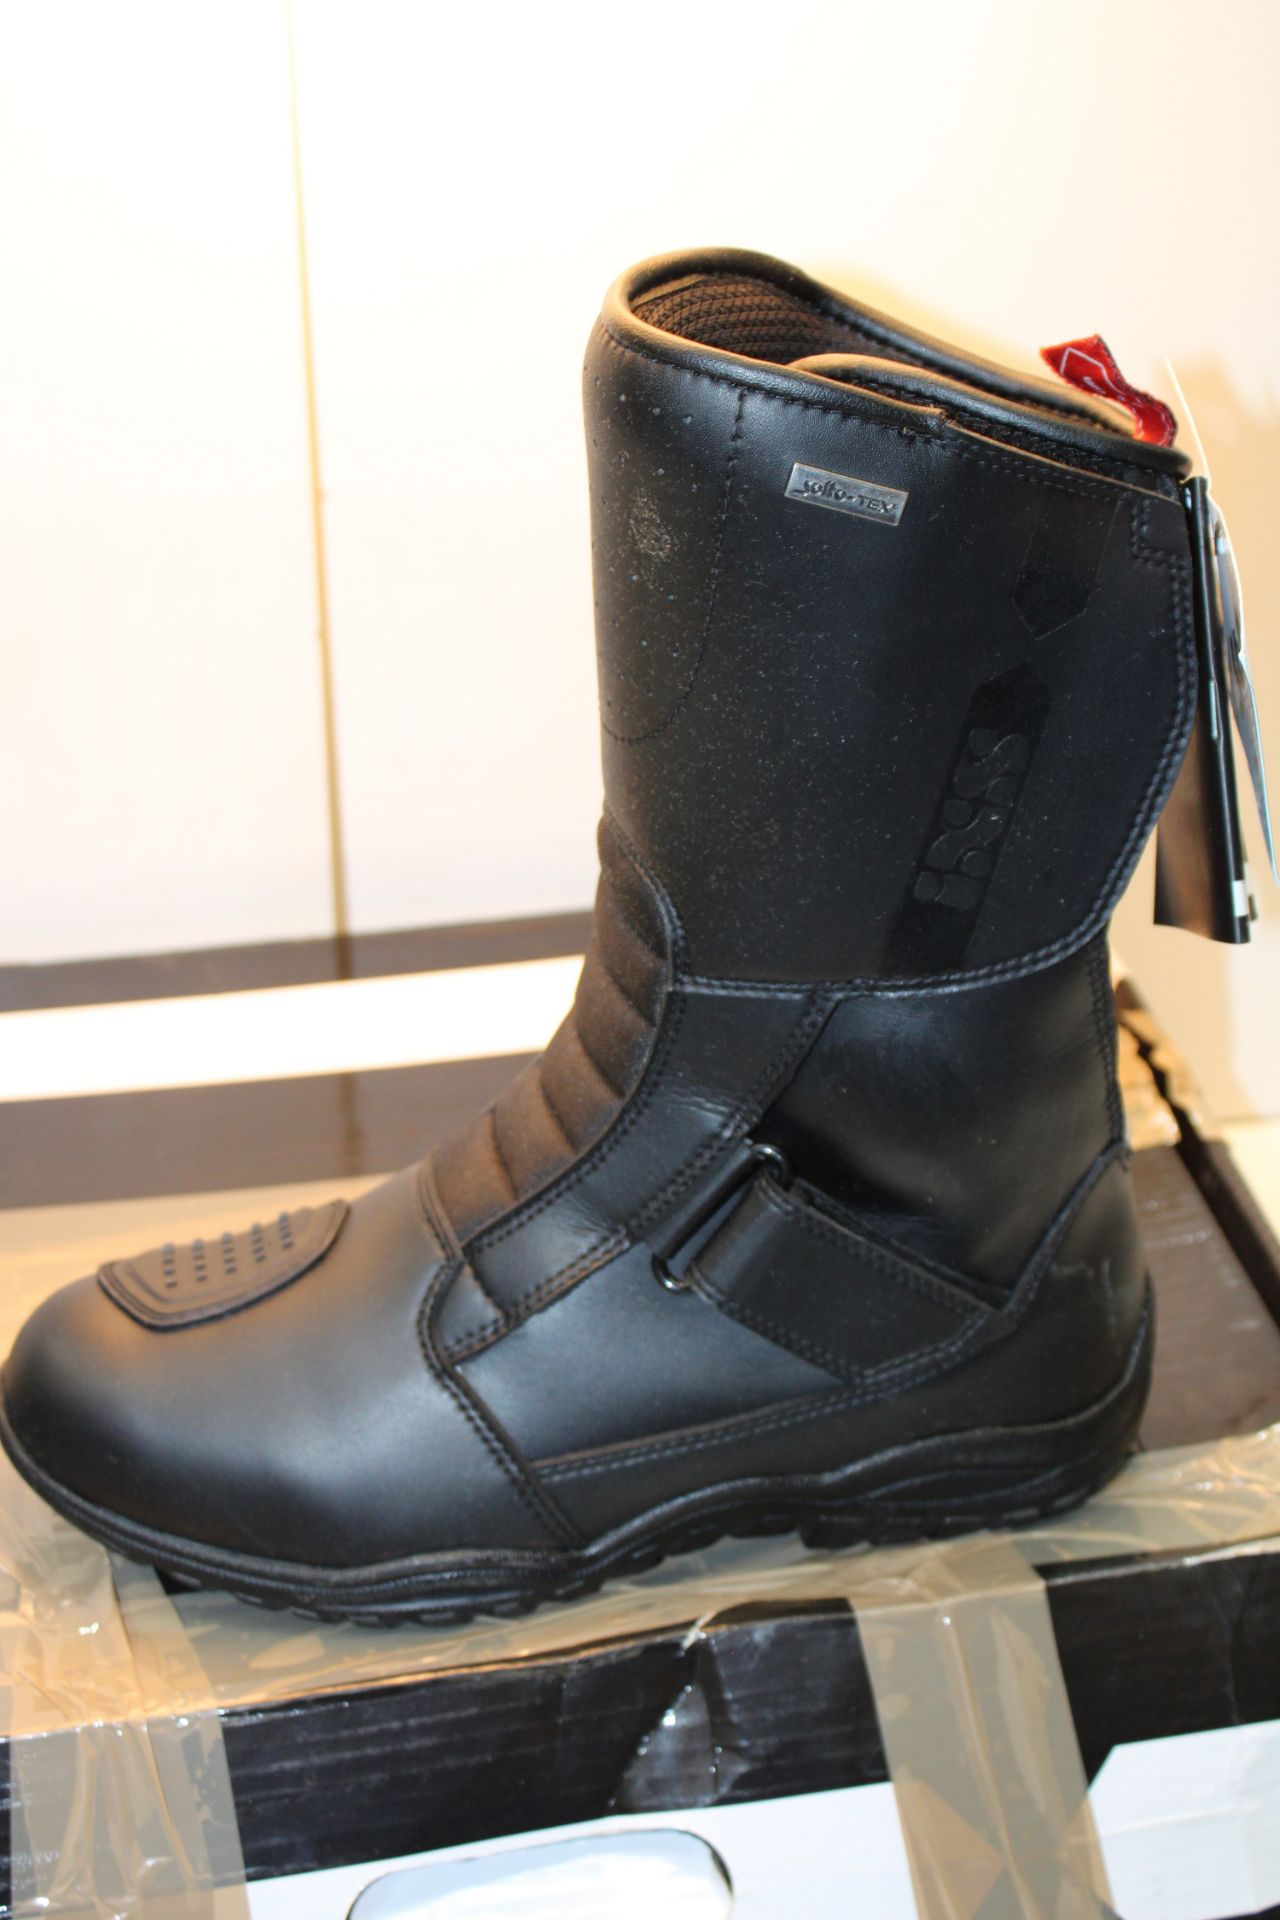 BOXED TOUR STIEFEL CLASSIC - ST EURO 42 MOTOR CYCLE BOOTS Condition ReportAppraisal Available on